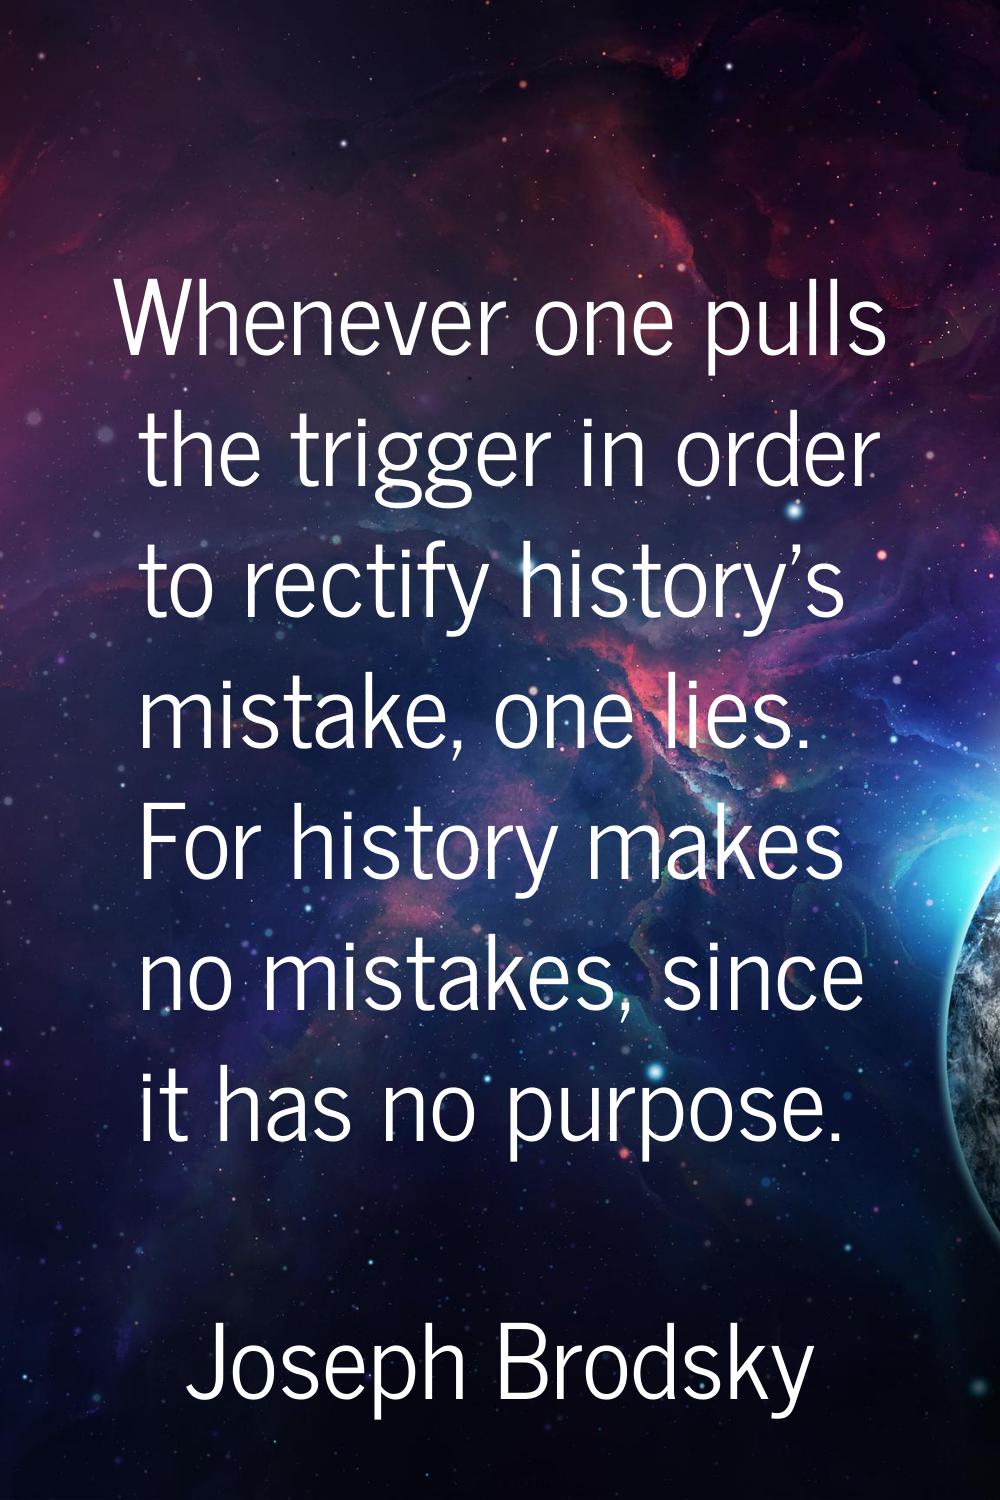 Whenever one pulls the trigger in order to rectify history's mistake, one lies. For history makes n